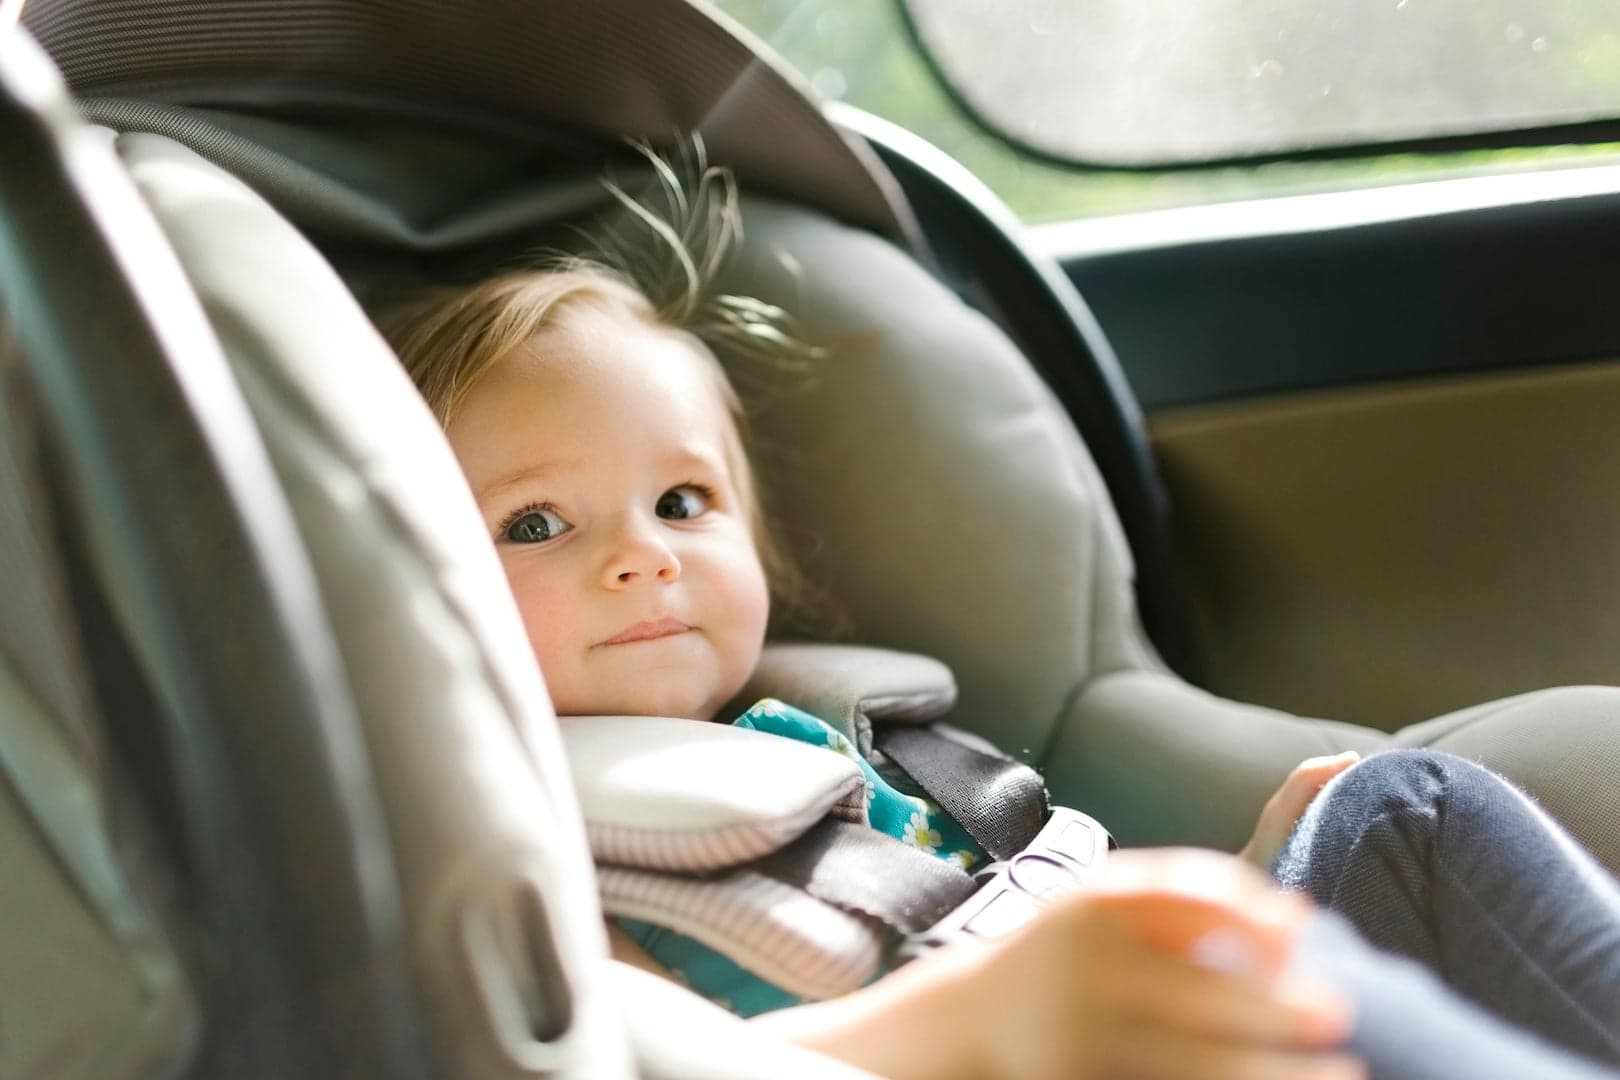 Mother’s Worried Text to Husband About Car Seat Keeps Baby Safe in Crash